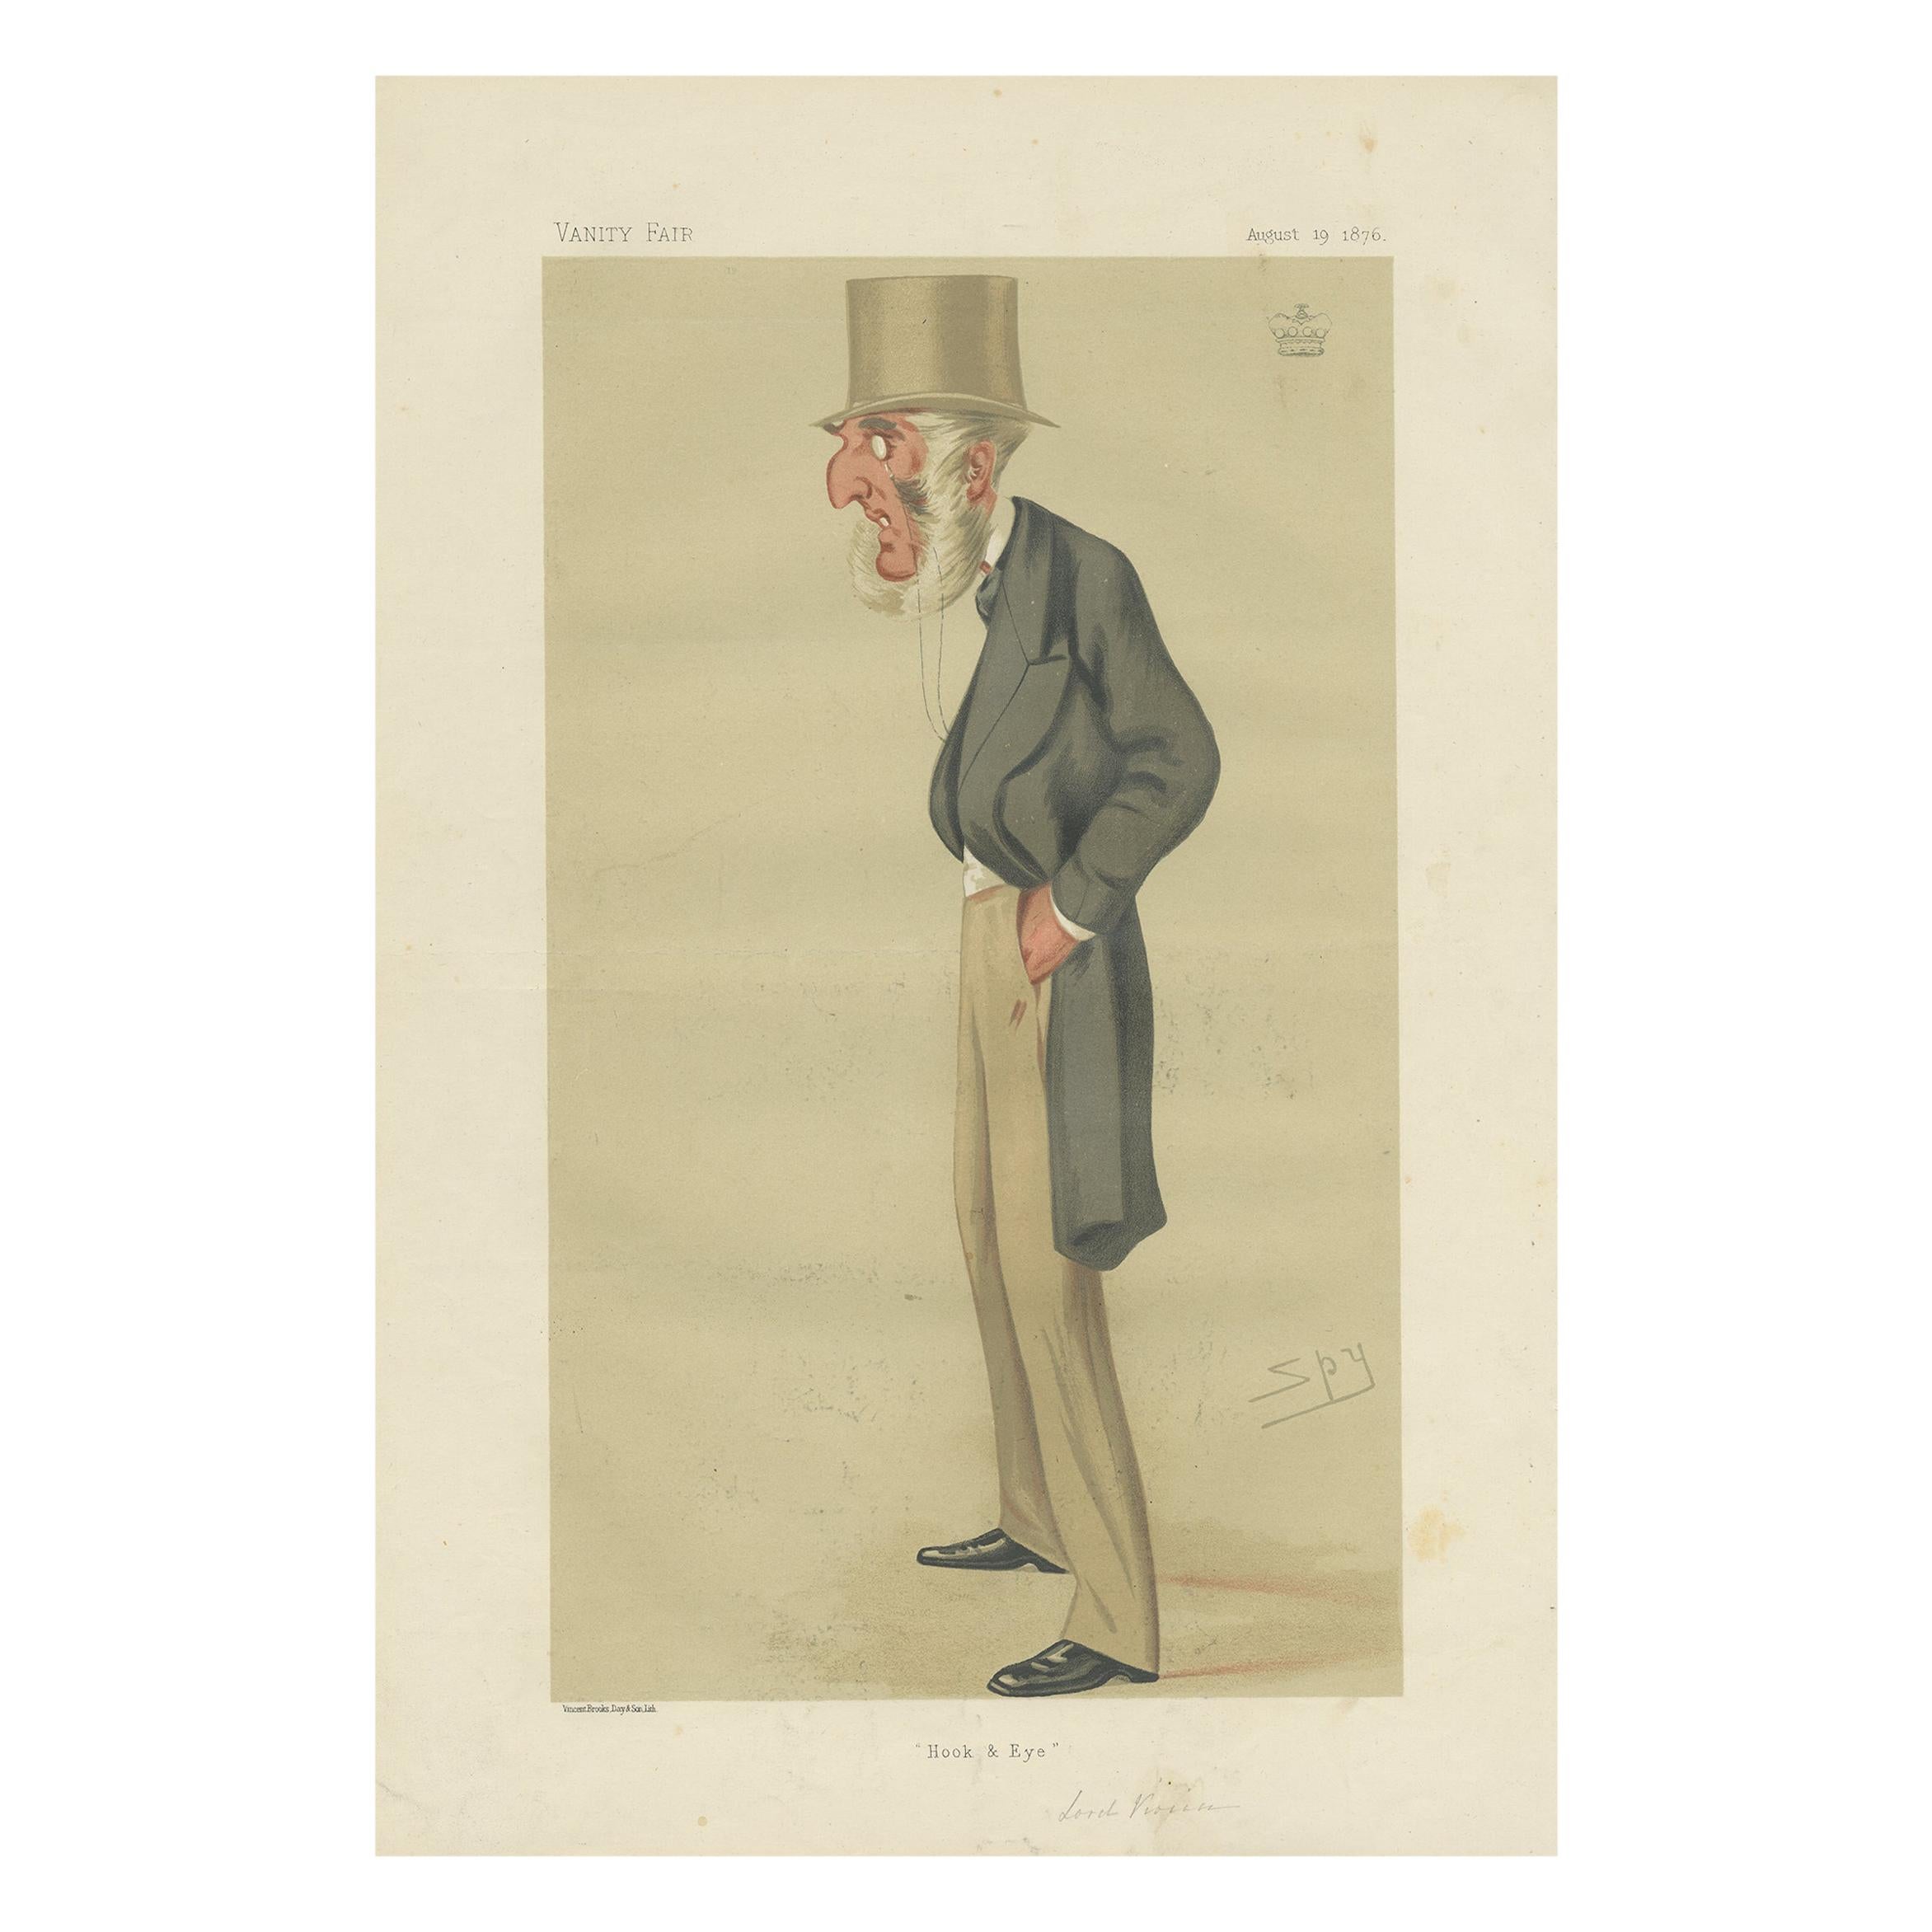 Antique Print of Lord Vivian published in the Vanity Fair, 1876